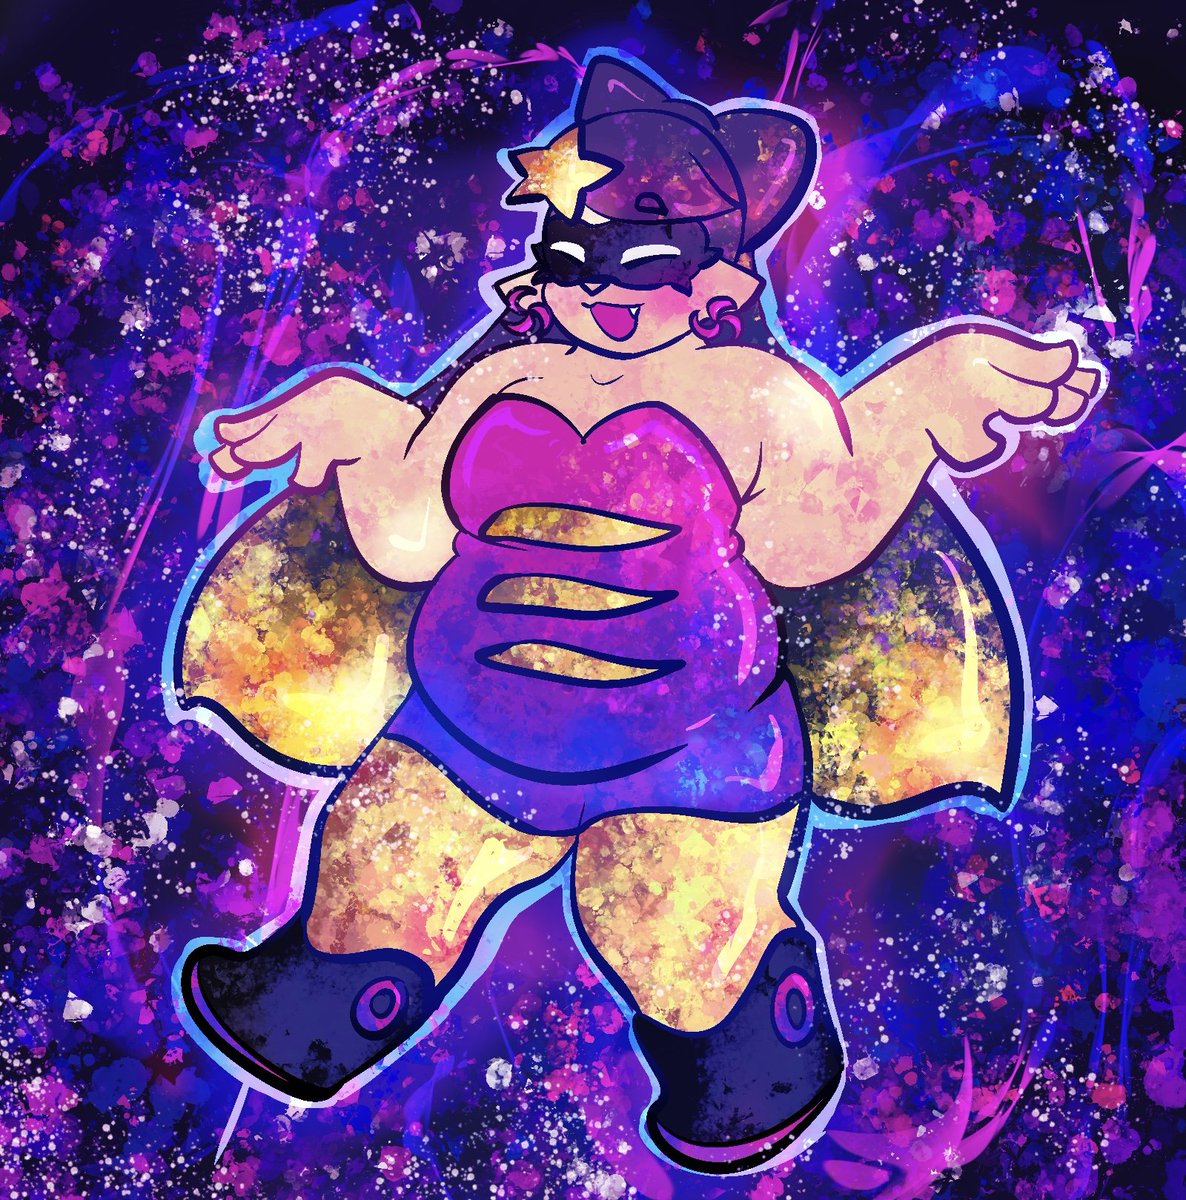 Someone com'd me for a Callie with a space theme and oh my god I adore the results 😭